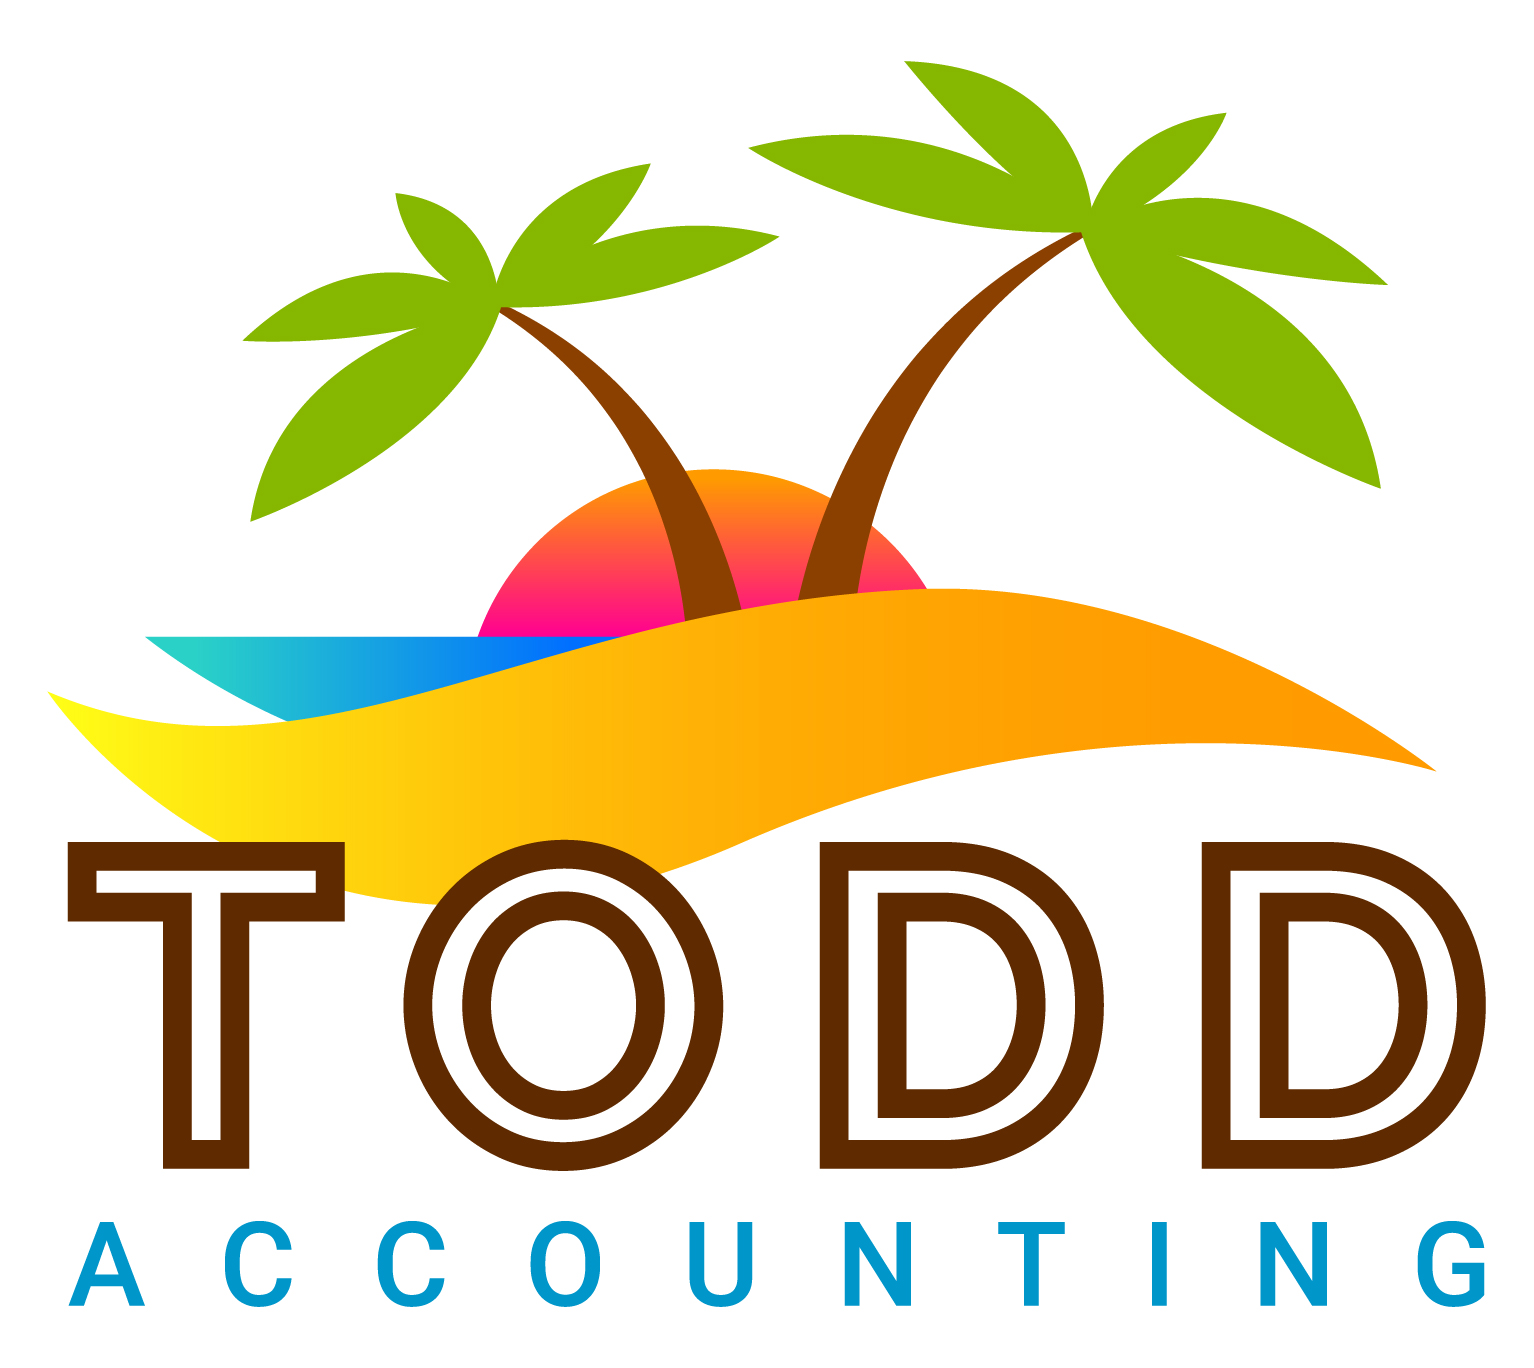 Todd’s Accounting Services Inc./尾崎会計事務所ロゴ